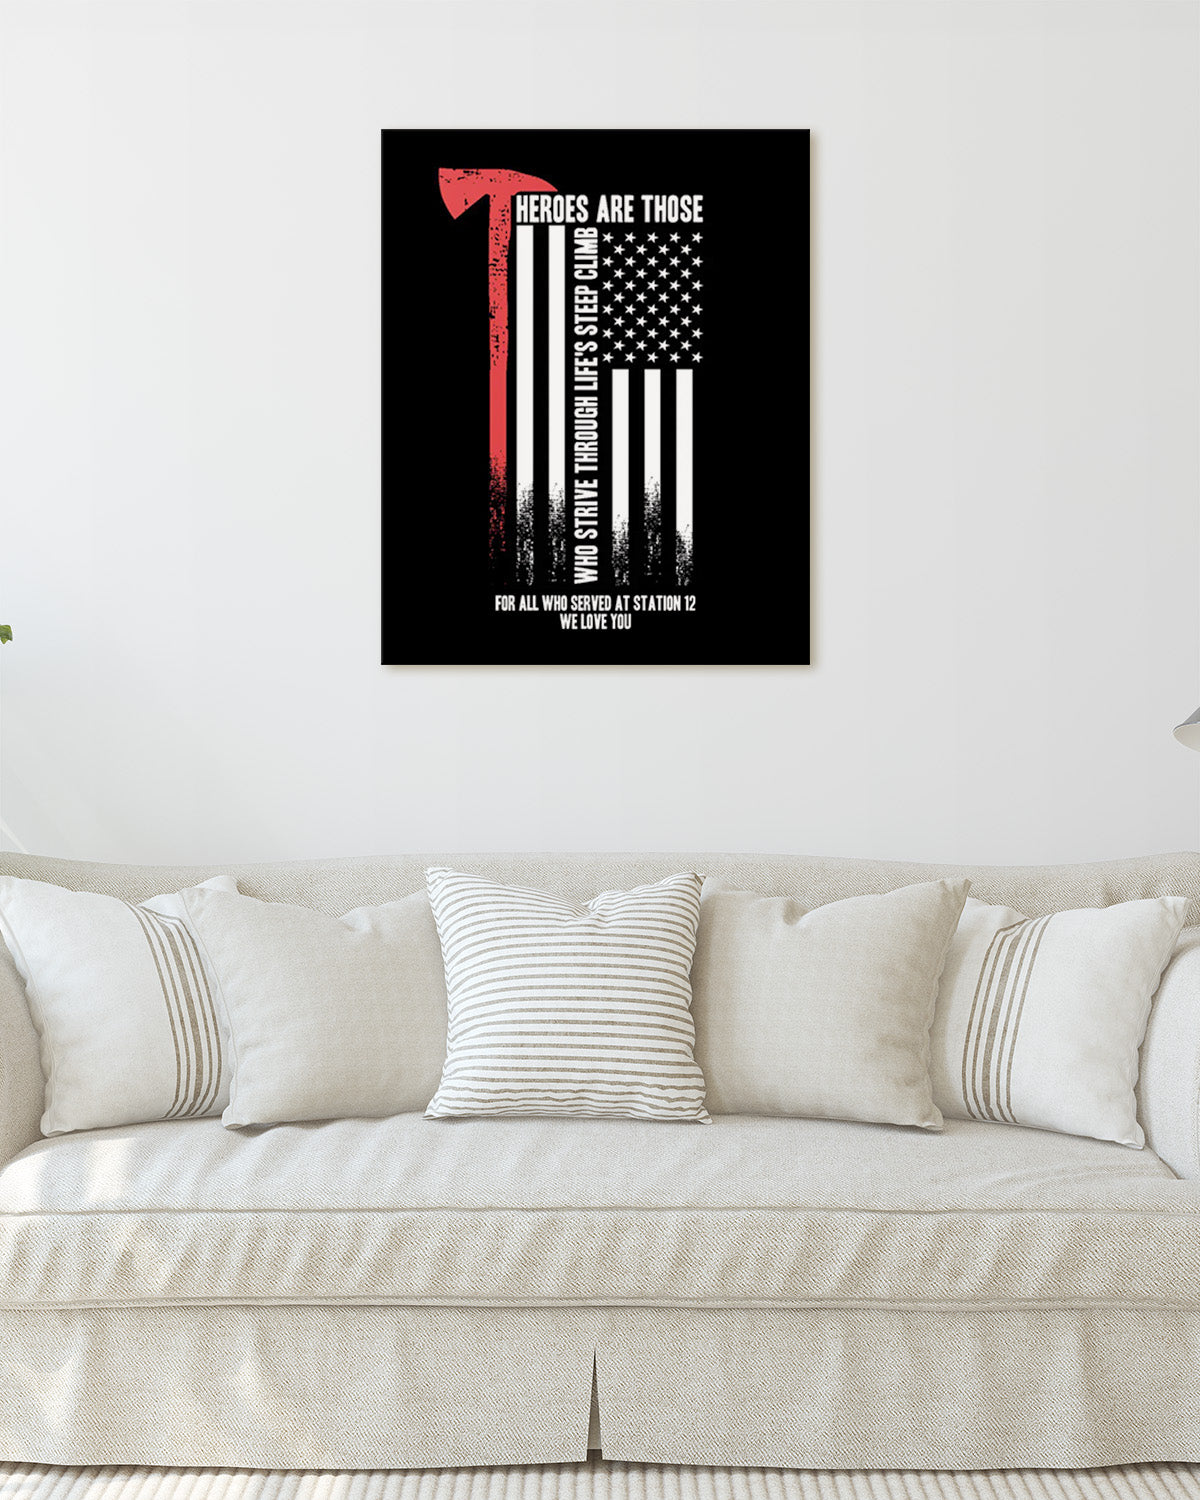 Customizable firefighter Wall decor - Heroes Are Those Who Strive -  Canvas with a black background